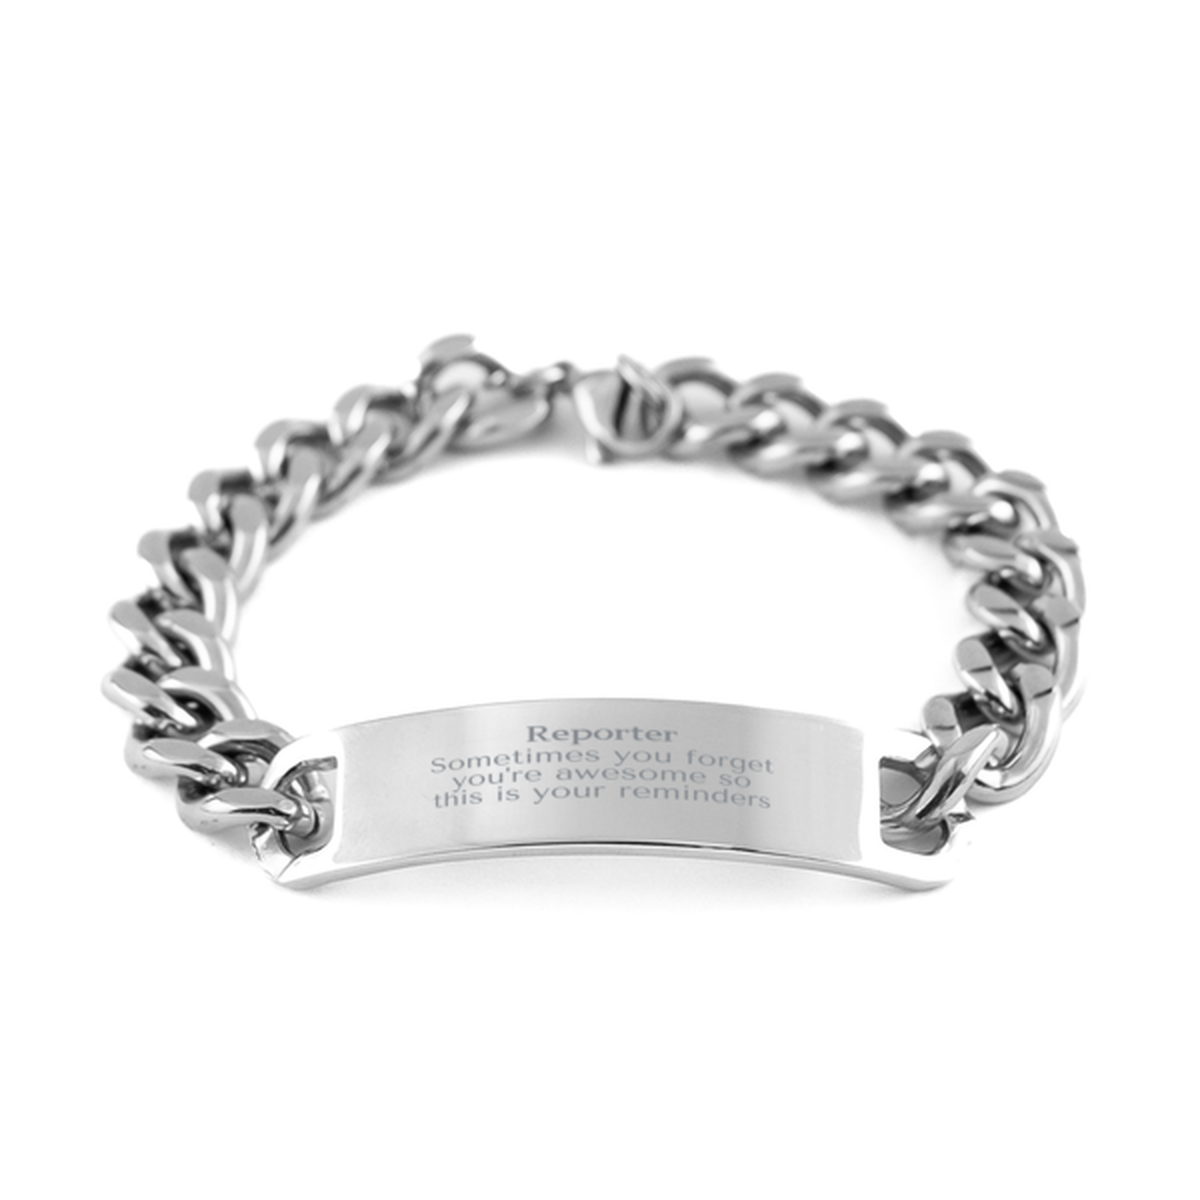 Sentimental Reporter Cuban Chain Stainless Steel Bracelet, Reporter Sometimes you forget you're awesome so this is your reminders, Graduation Christmas Birthday Gifts for Reporter, Men, Women, Coworkers